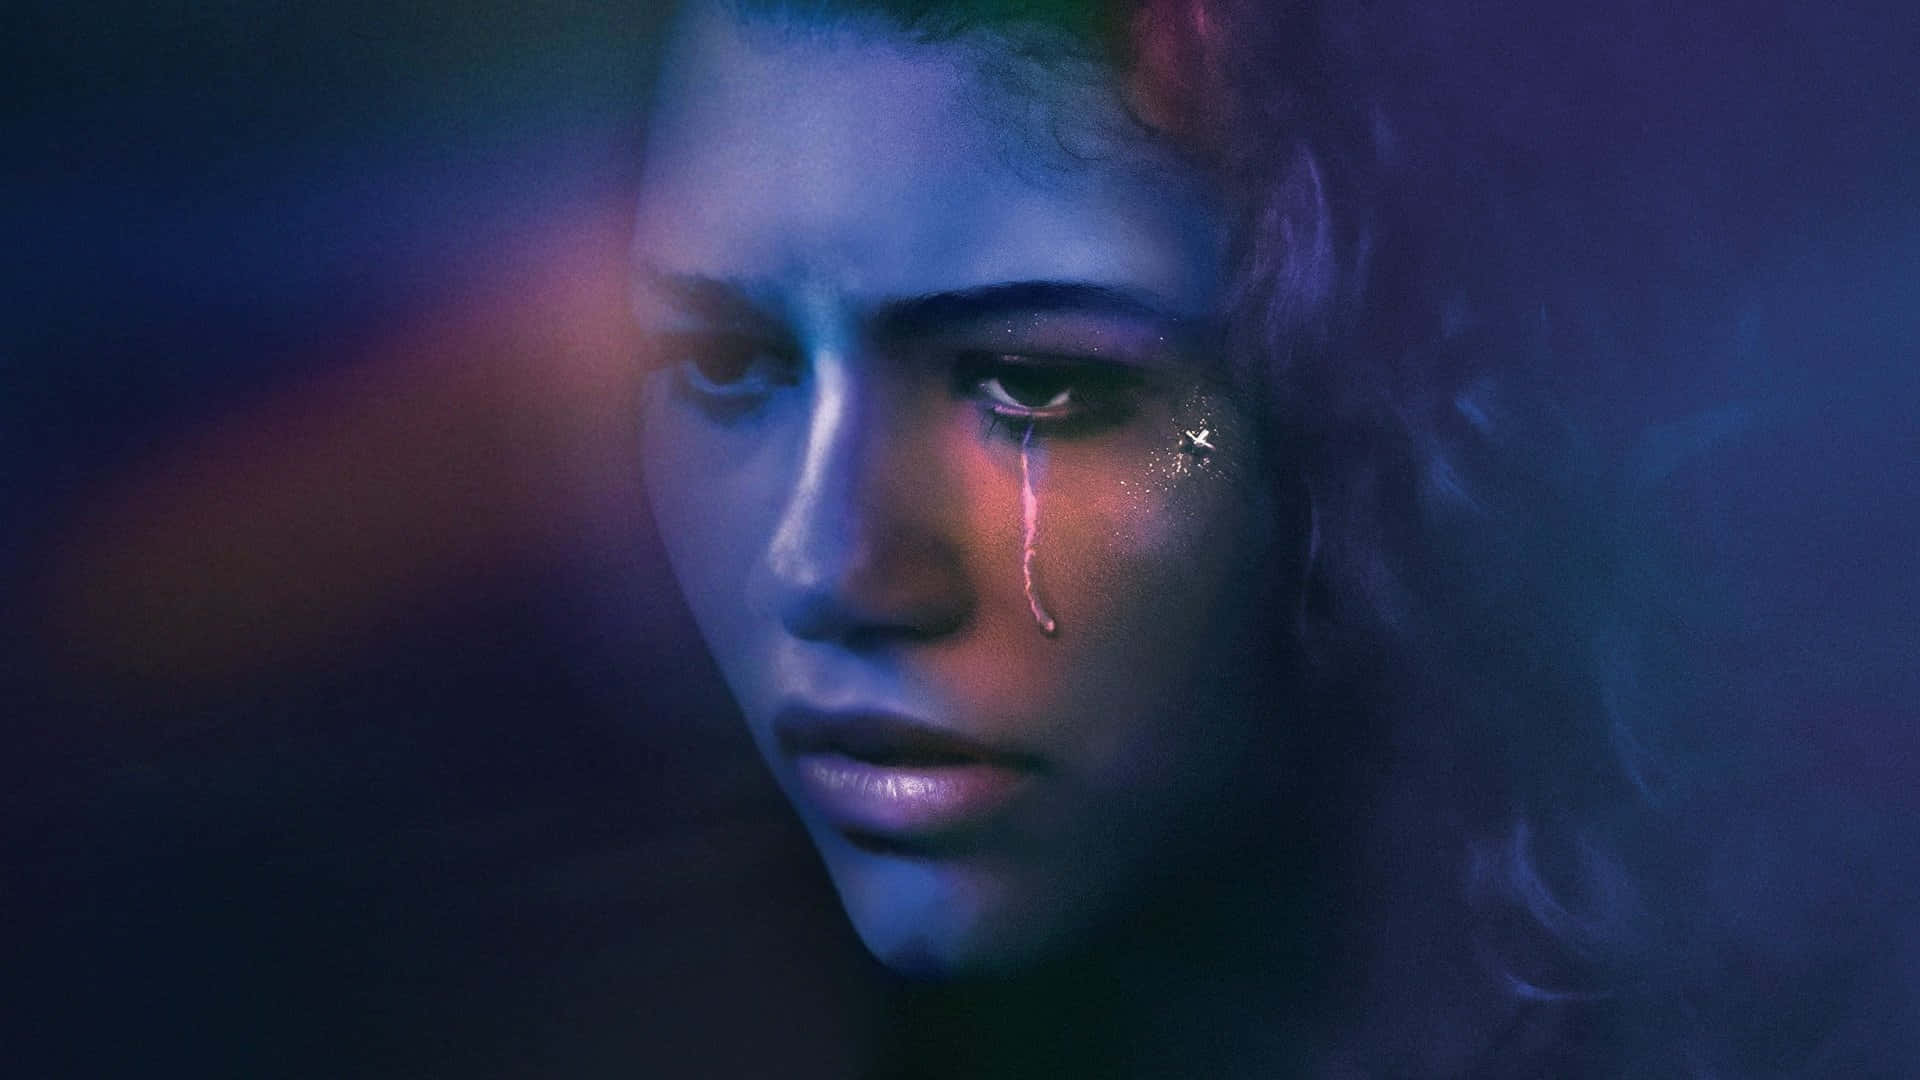 "After a short hiatus, Euphoria is finally returning with its highly anticipated second season!" Wallpaper